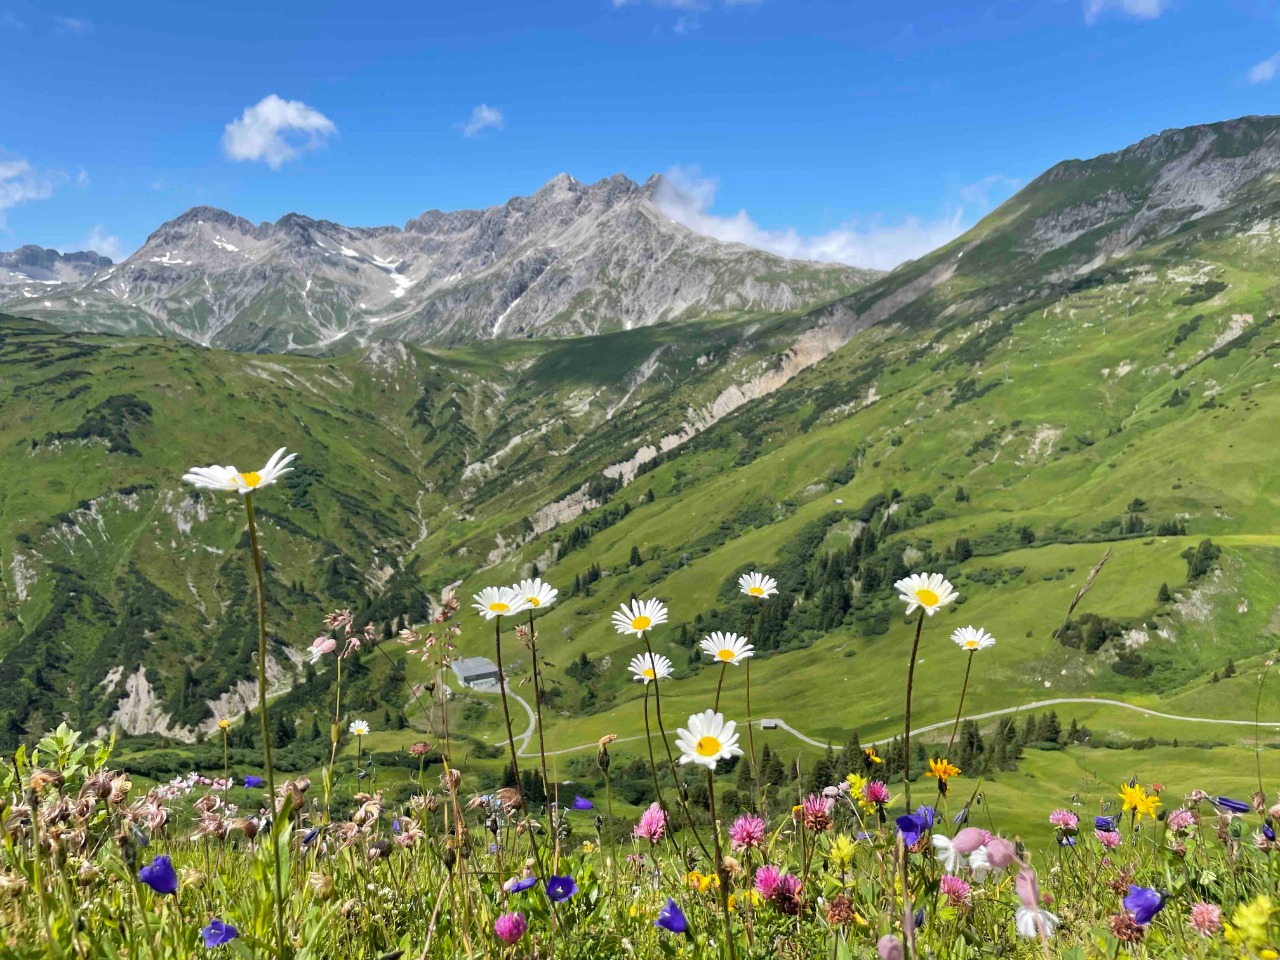 Hotel Arlberg The area is known for its prime slopes and it's said that, while other European winter destinations are famous for their social scenes, if you are serious about skiing, Lech-Zuers is the place to go. Come in summer to hike and bike, it is as beautiful as it gets